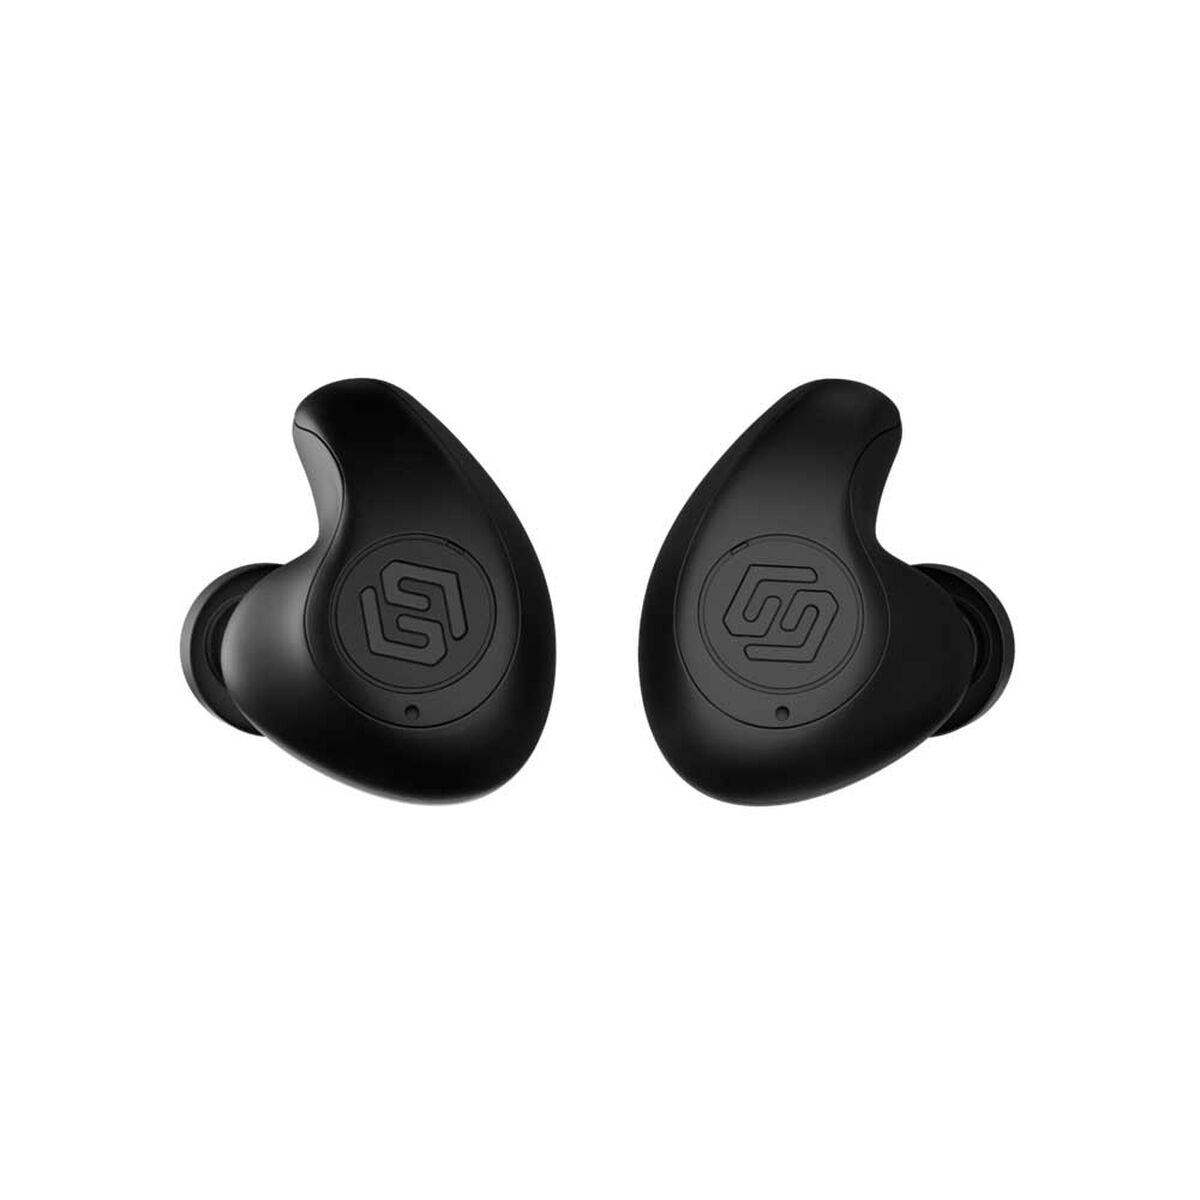 Audífonos Bluetooth In Ear Sleve Mobile X Buds Negros